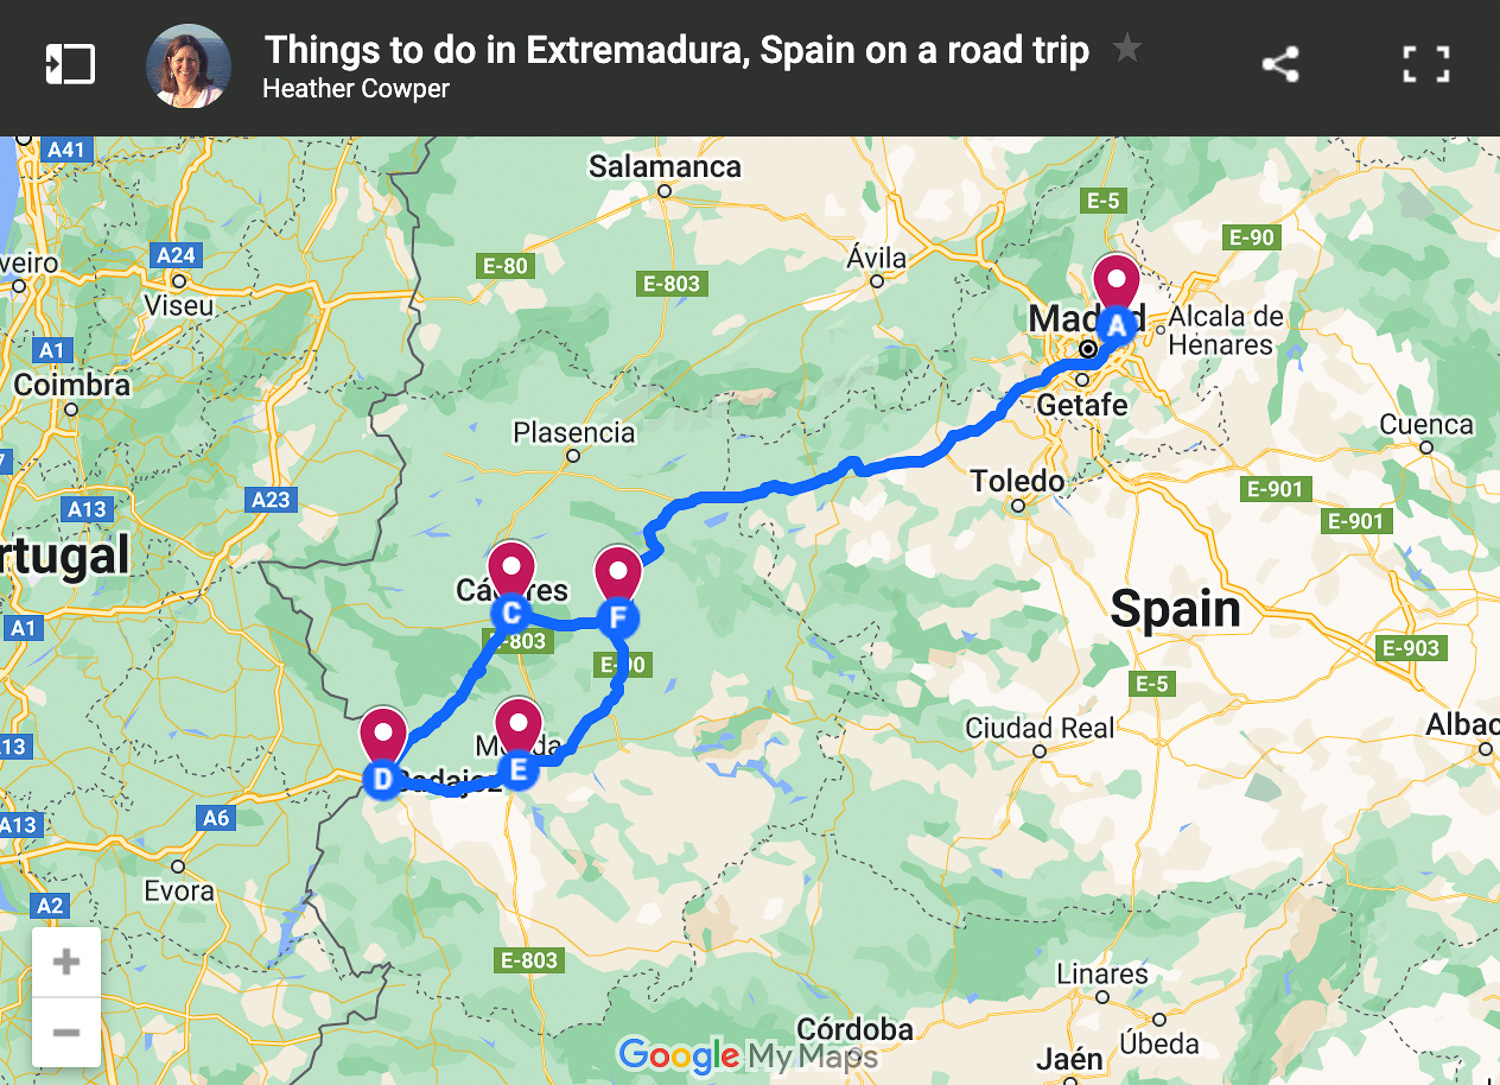 Map of road trip in Extremadura by Heatheronhertravels.com